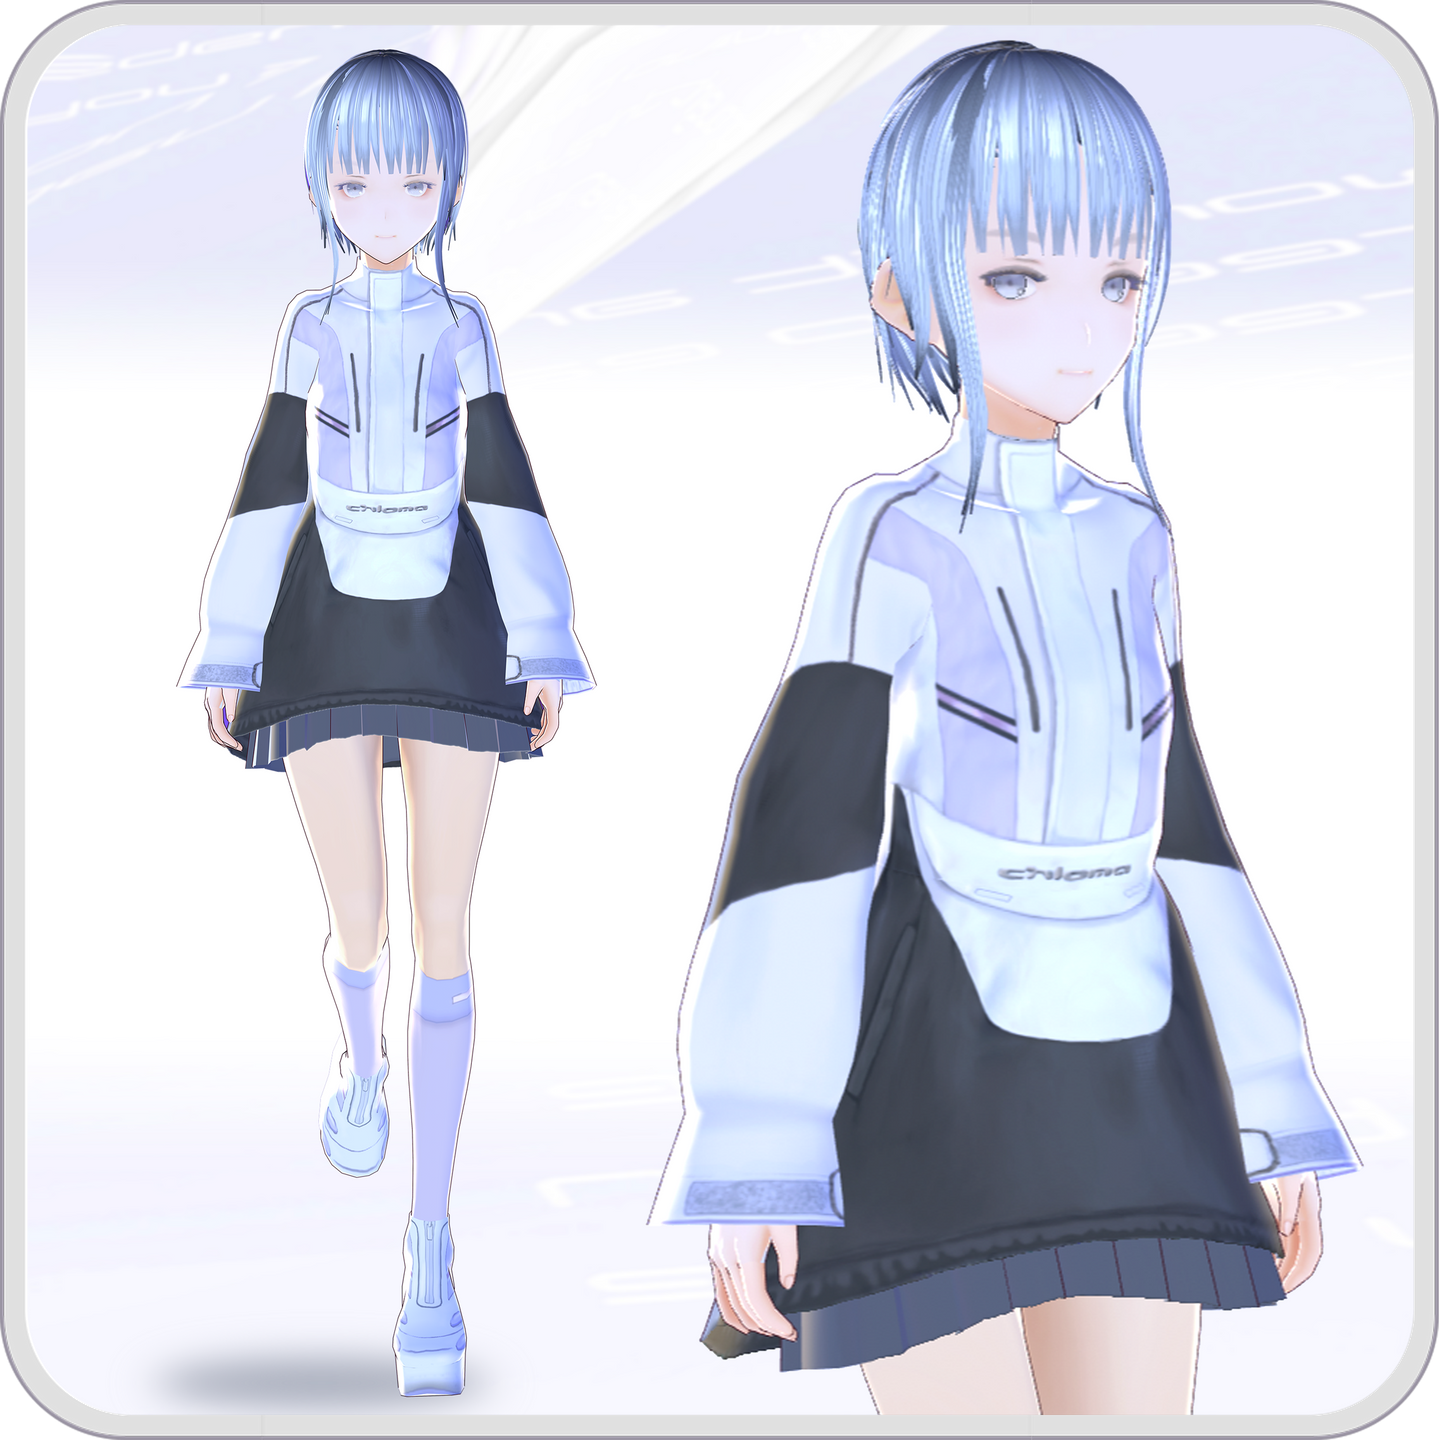 [VRoid Texture] Y2K Anorak for VR /ver. Onepiece